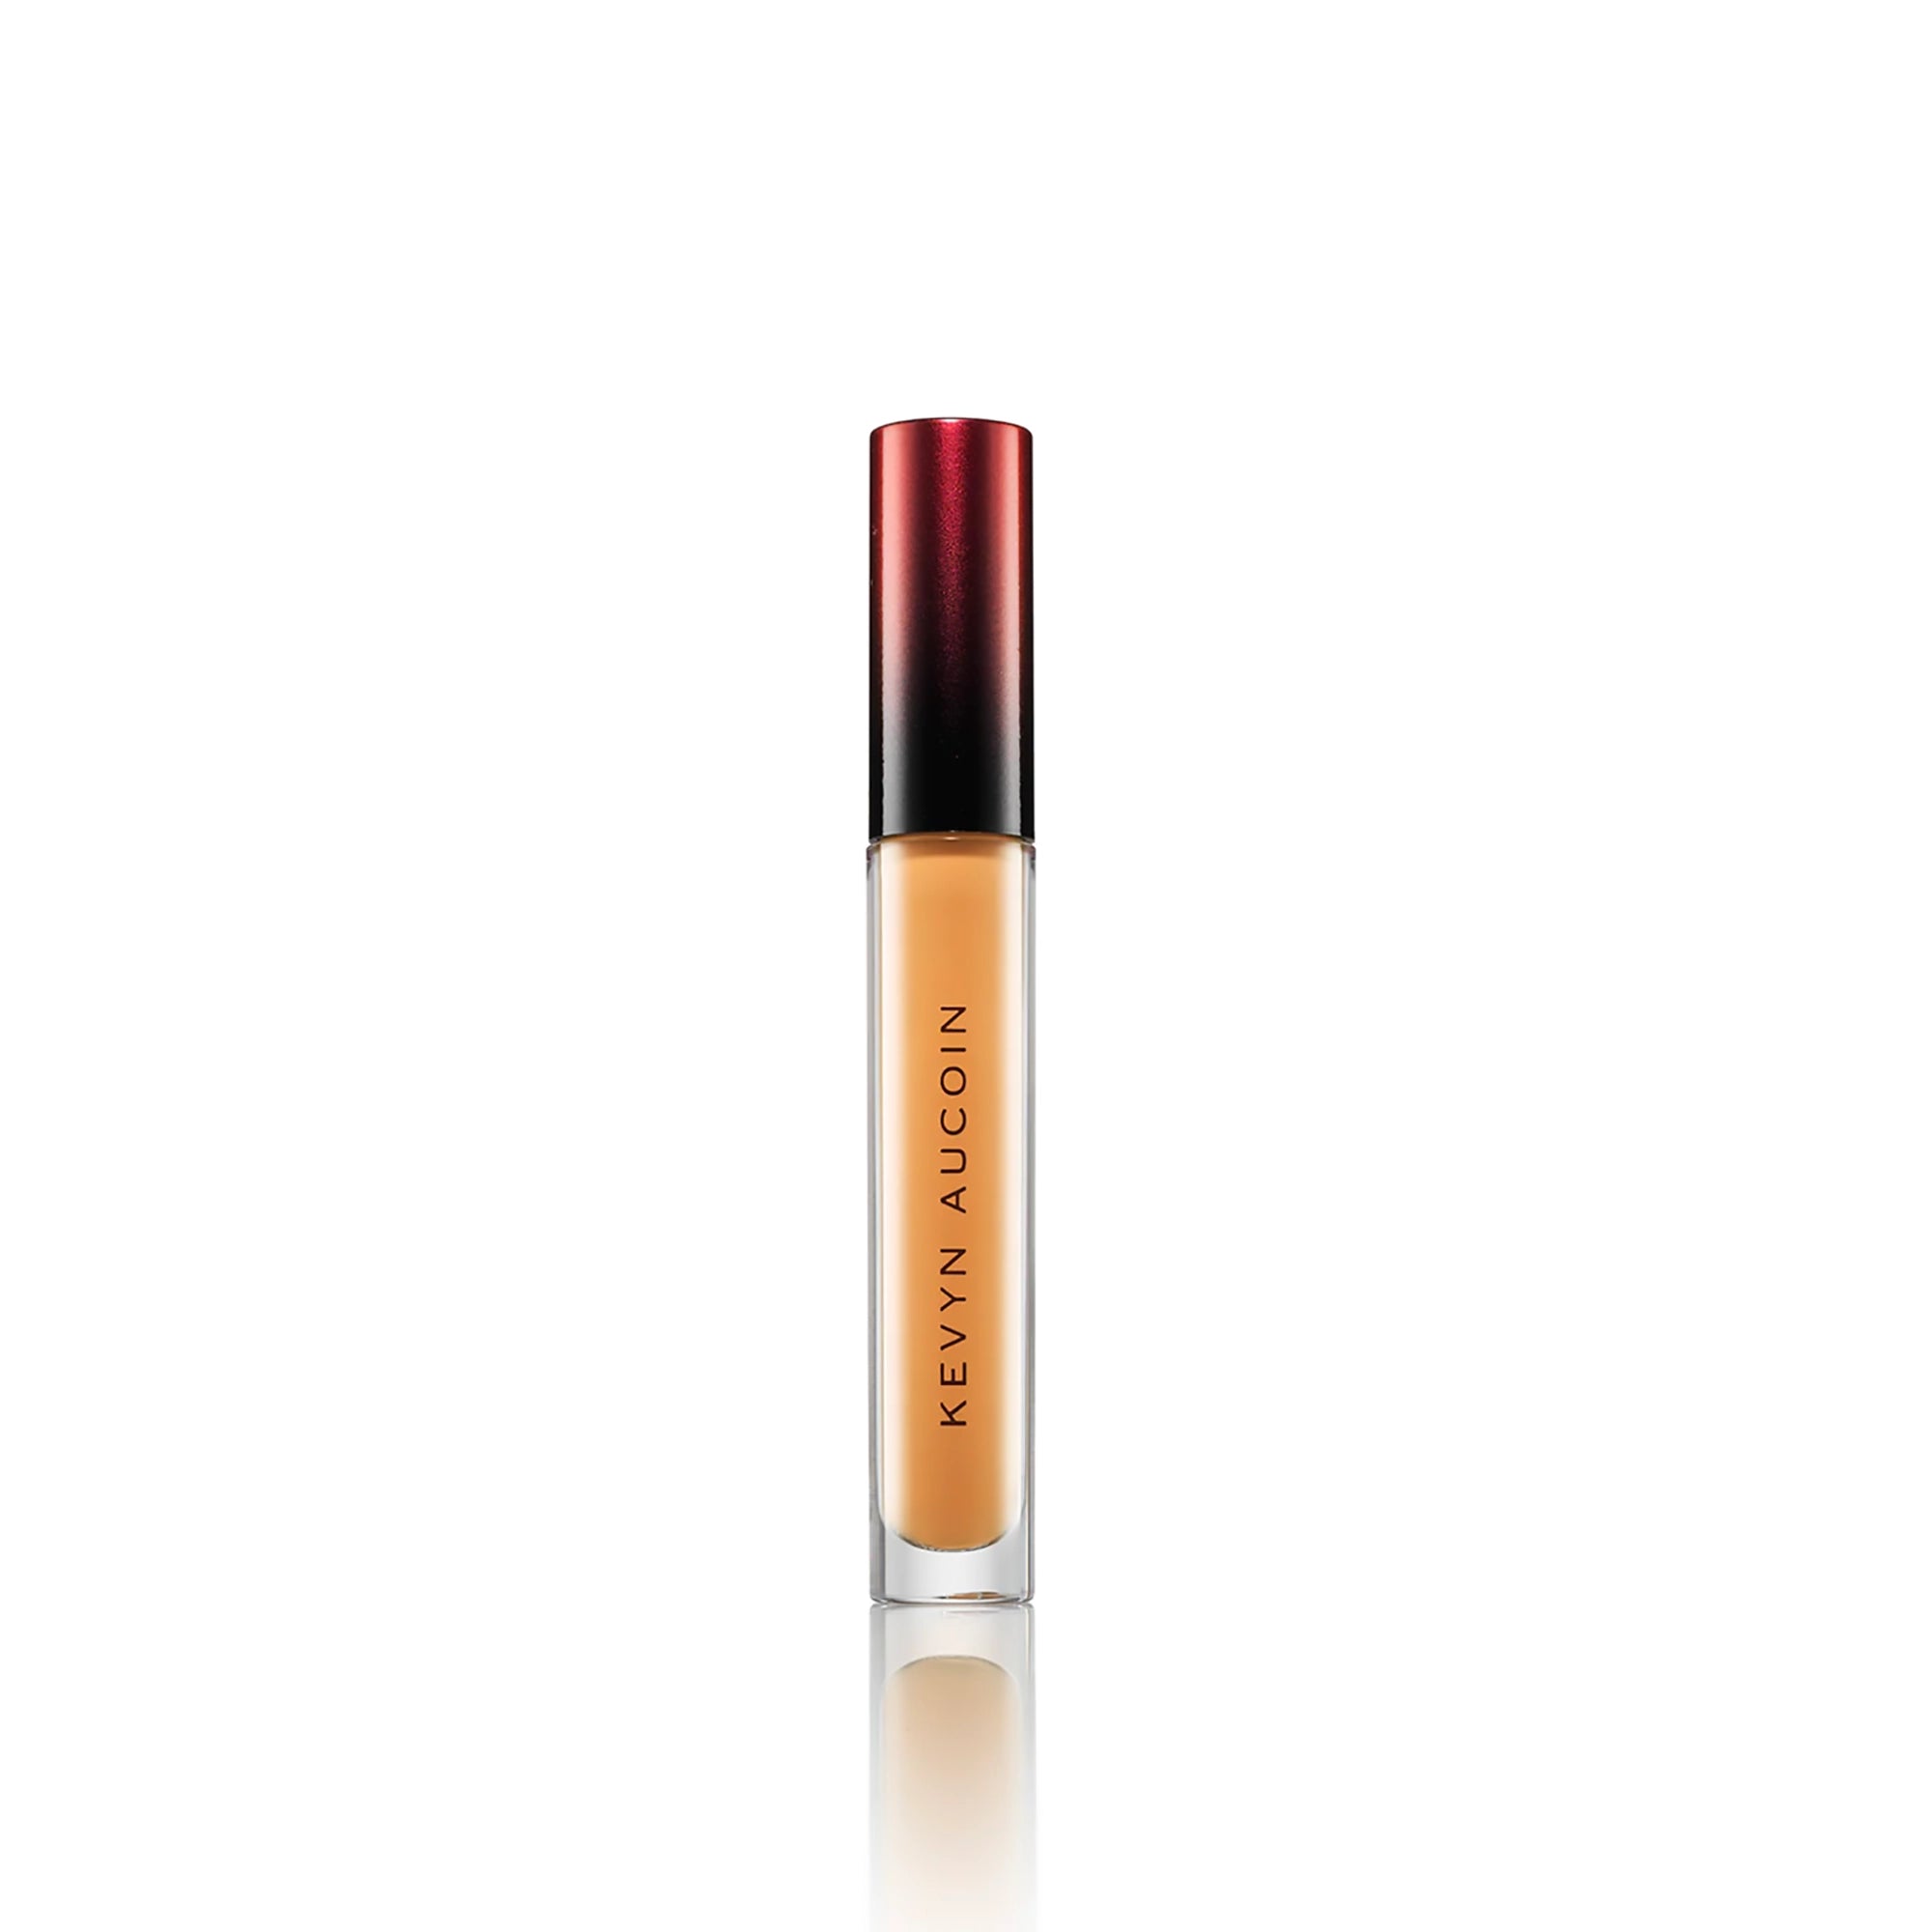 Kevyn Aucoin The Etherealist Super Natural Concealer / DEEP 7